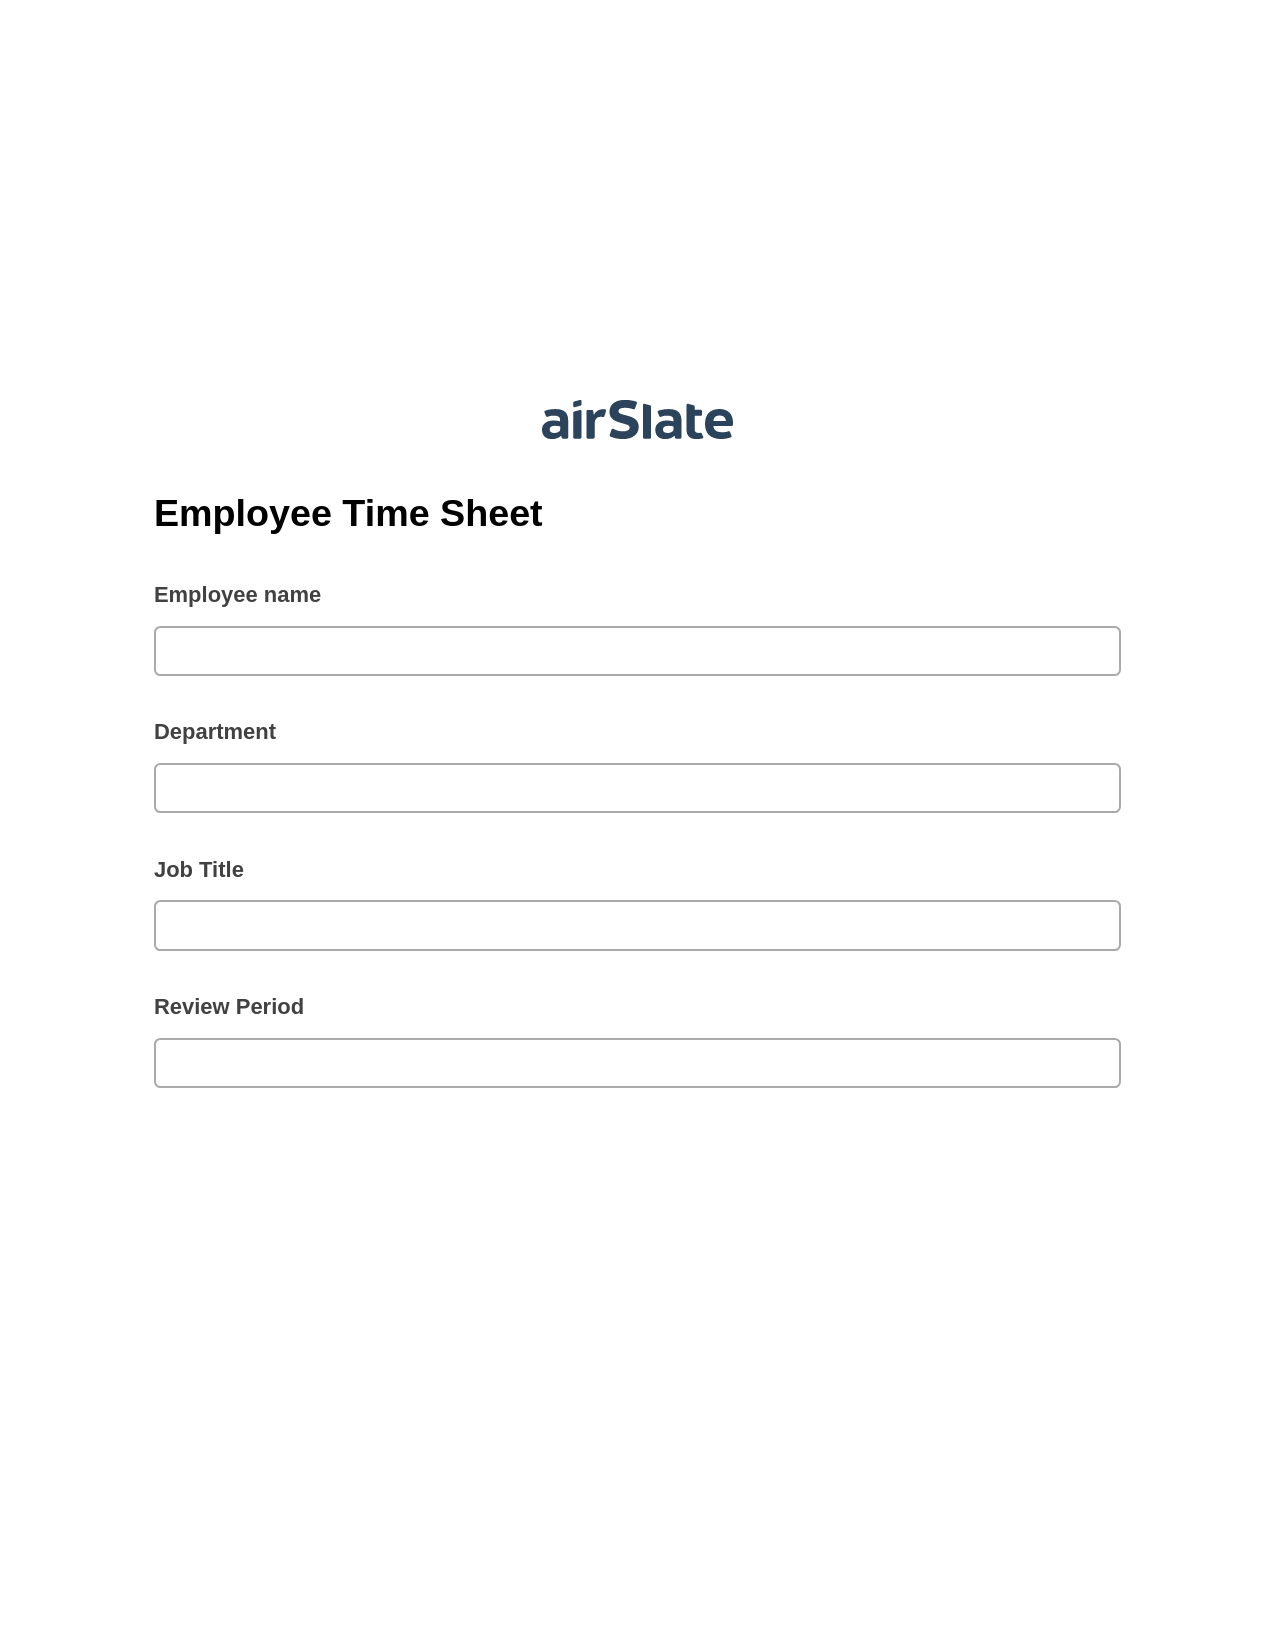 Multirole Employee Time Sheet Pre-fill Dropdowns from Office 365 Excel Bot, Update Audit Trail Bot, Archive to Google Drive Bot